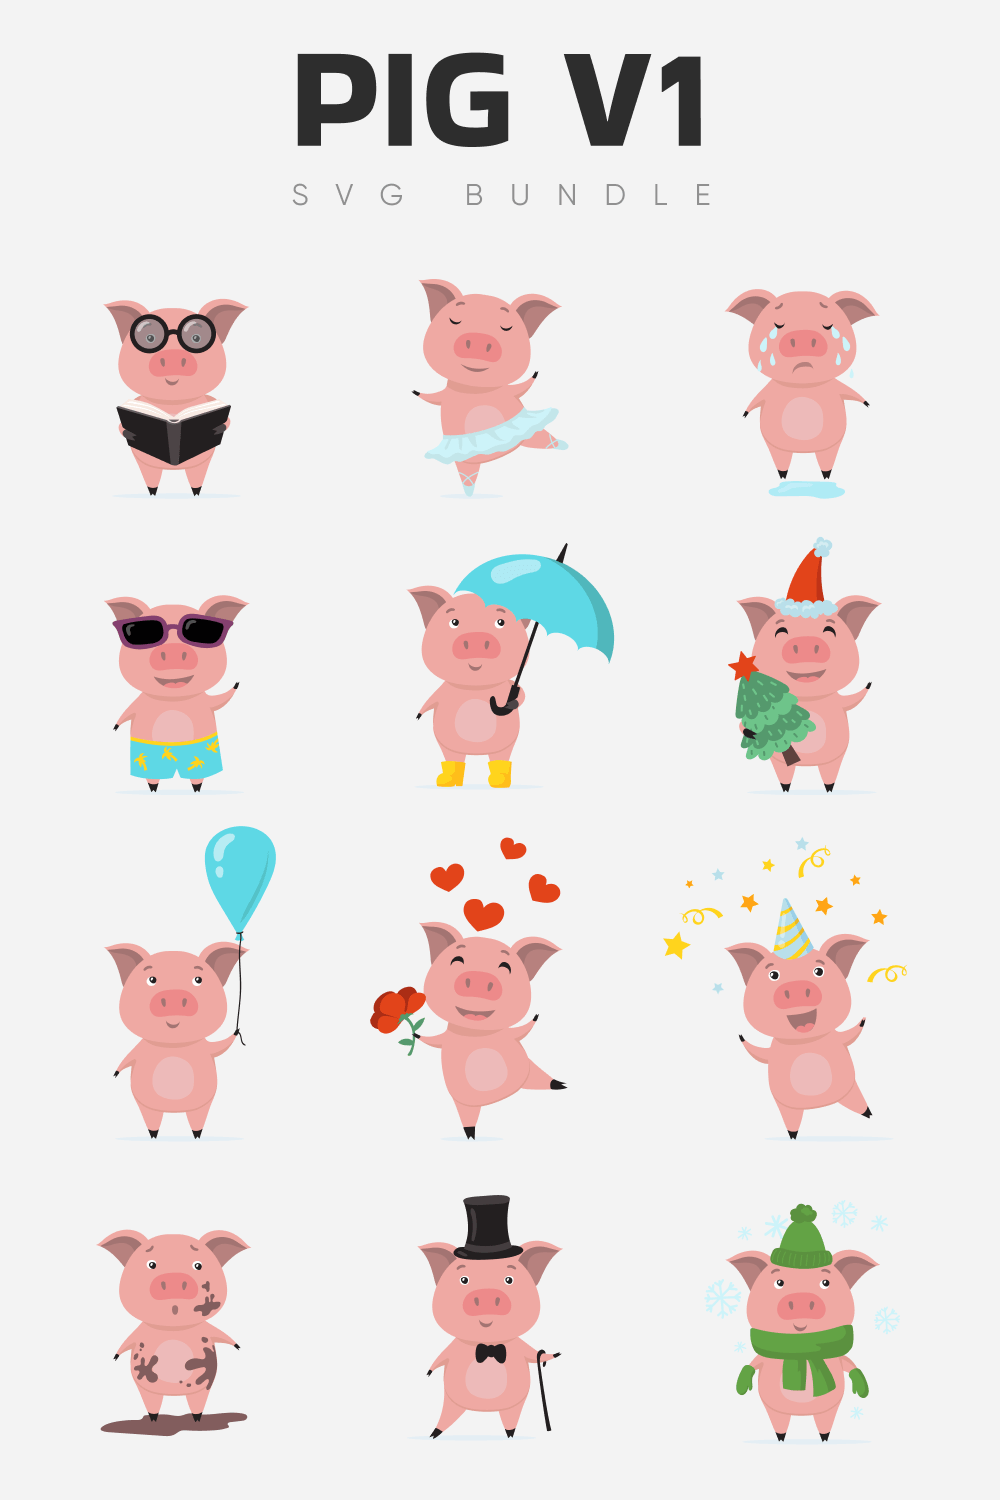 Bunch of pigs with different expressions on them.